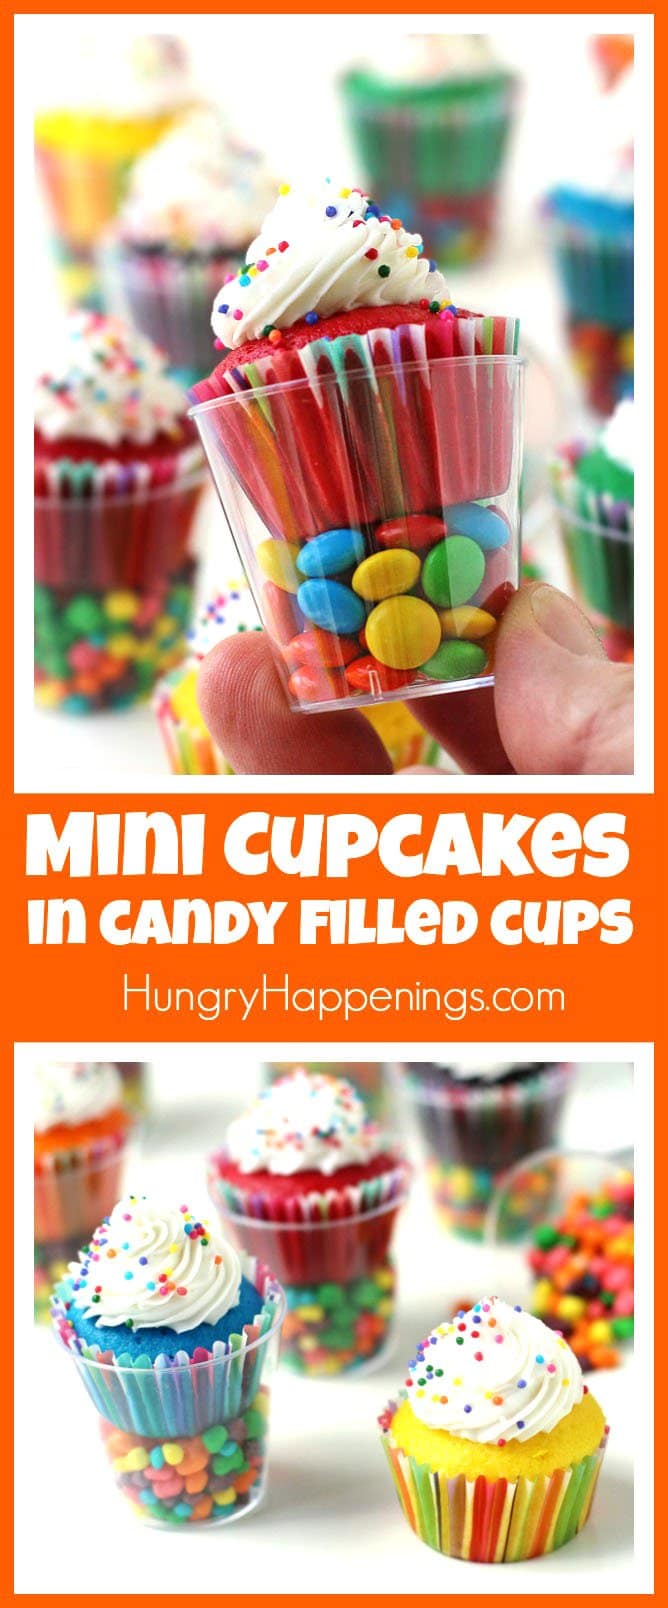 Serve Mini Cupcakes in Candy Filled Shot Glasses at your kid's birthday party or special event. They are quick and easy to make and fun to serve.